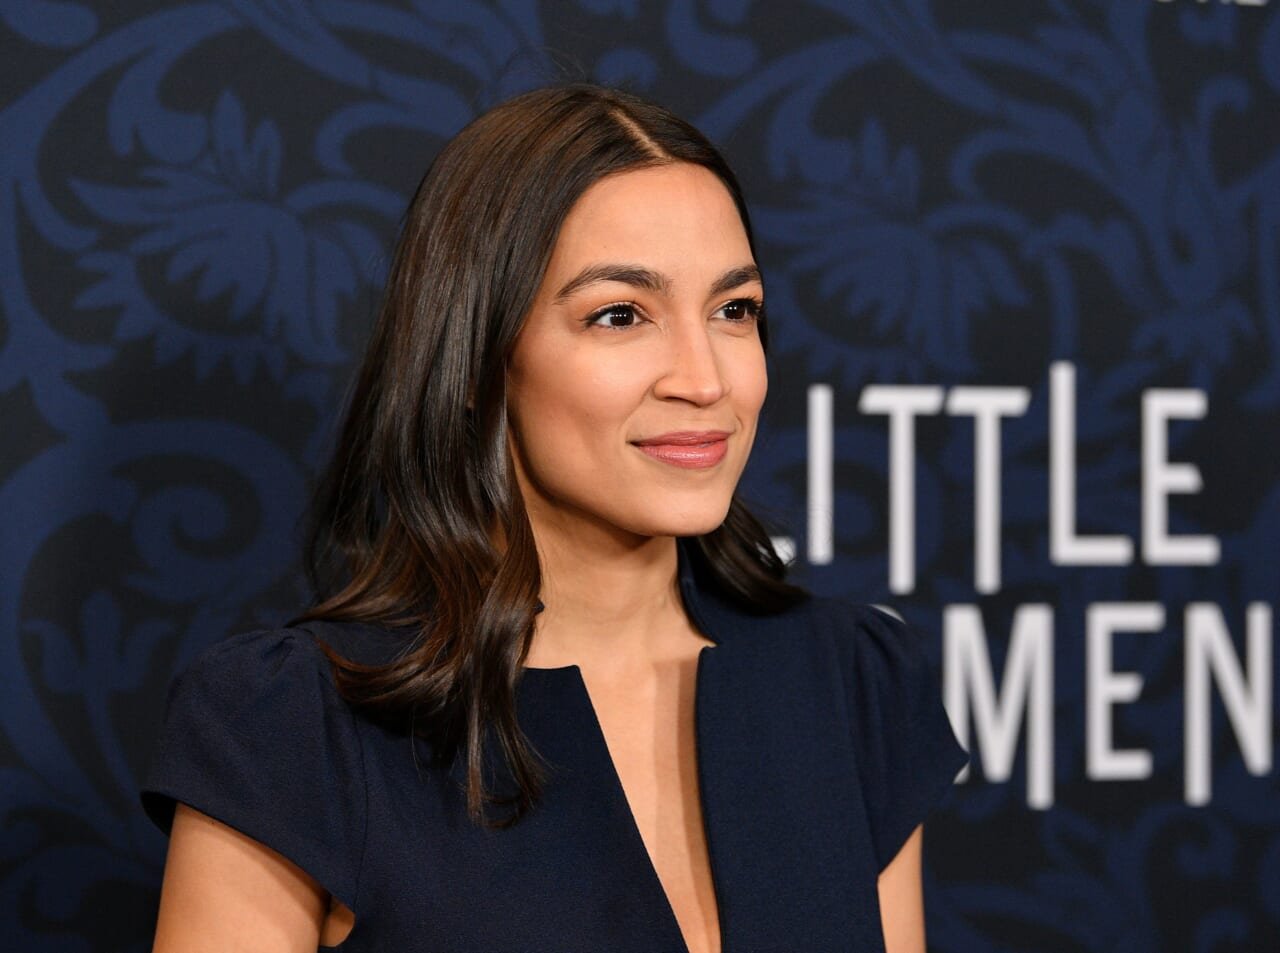 AOC reveals she's in therapy, learning to slow down post-Capitol riots